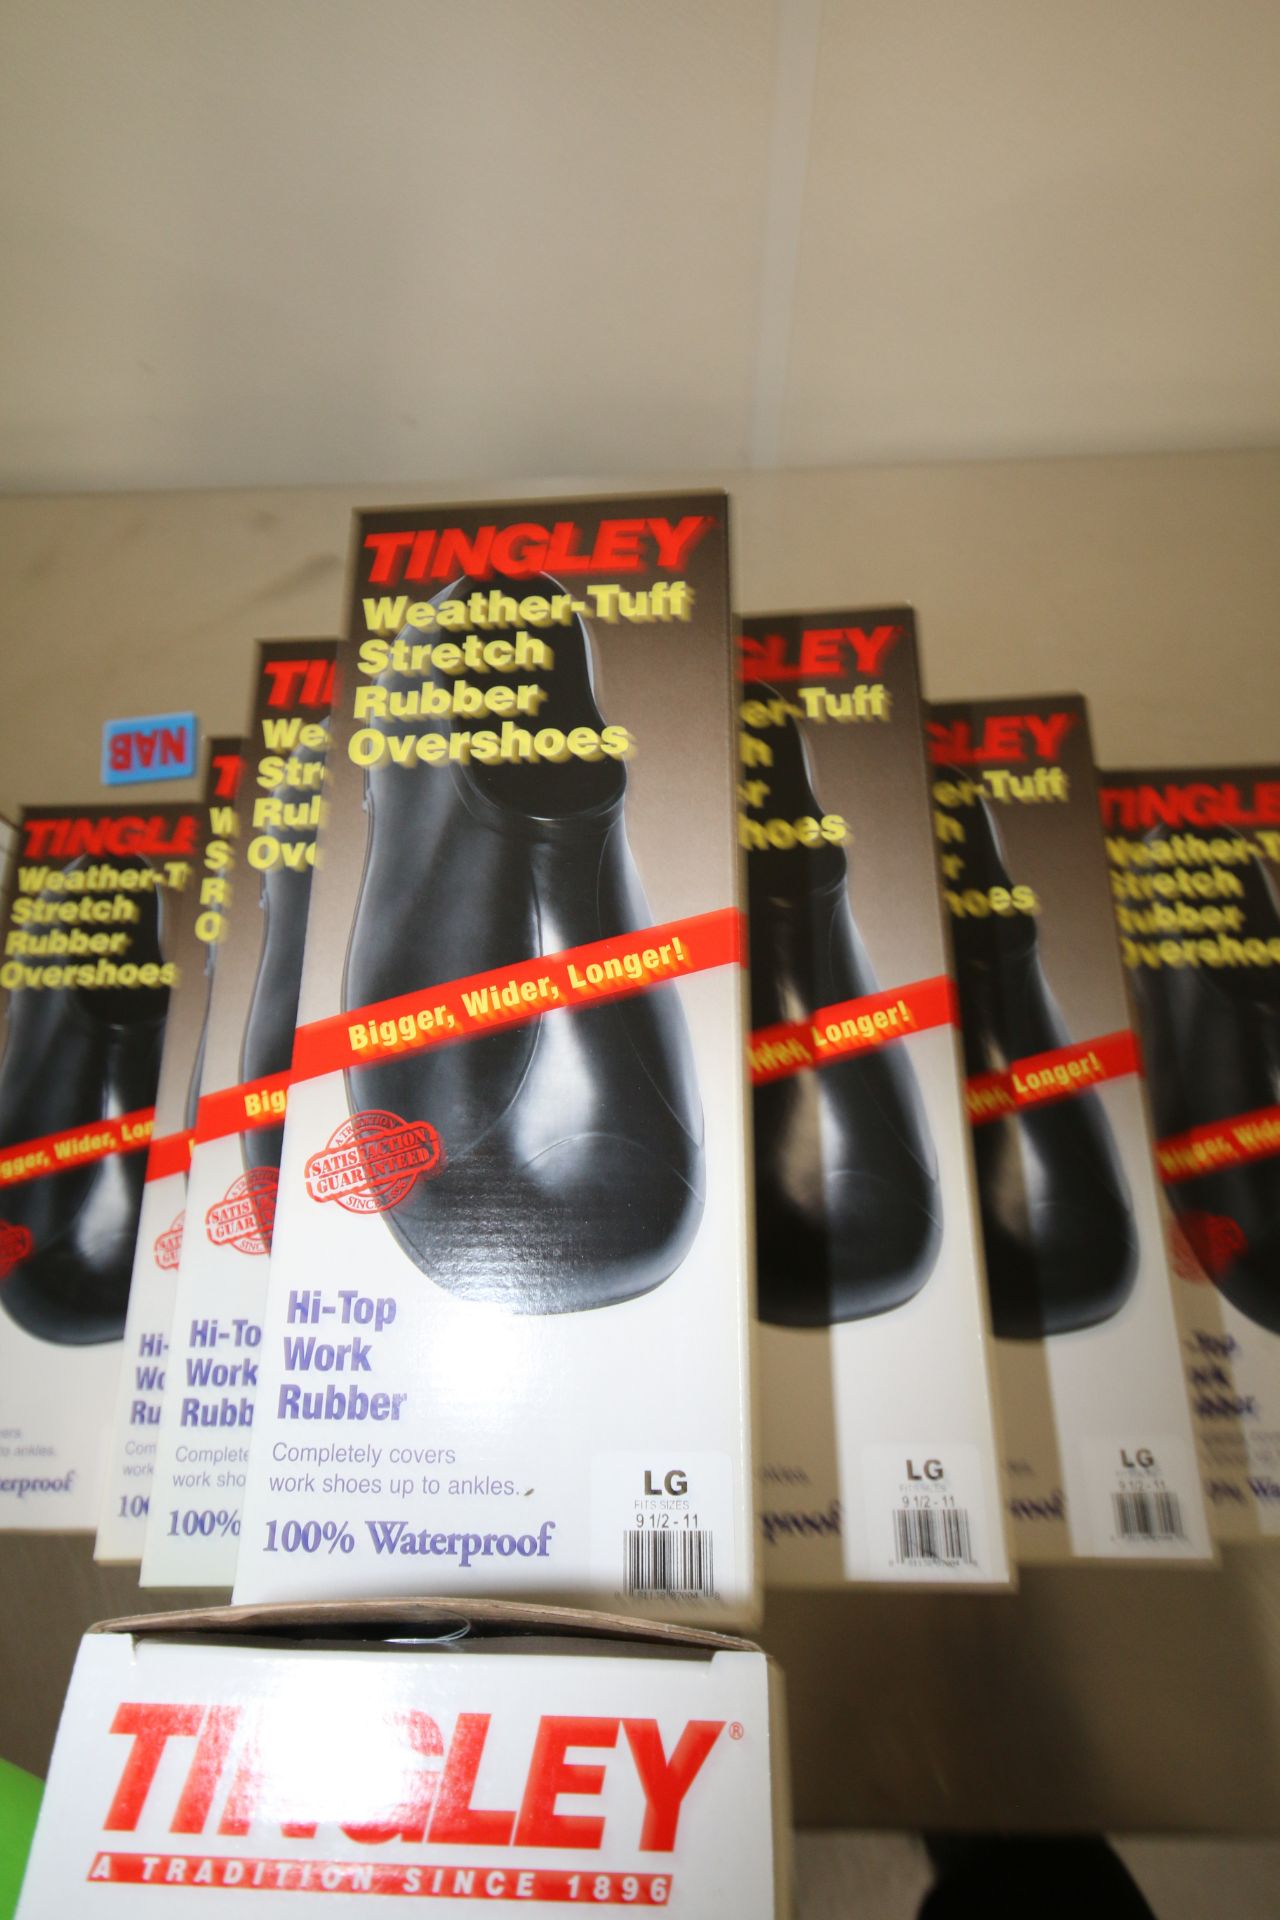 NEW Tingley Hi-Top Work Rubber Overshoes, SIZE LARGE - Image 2 of 2